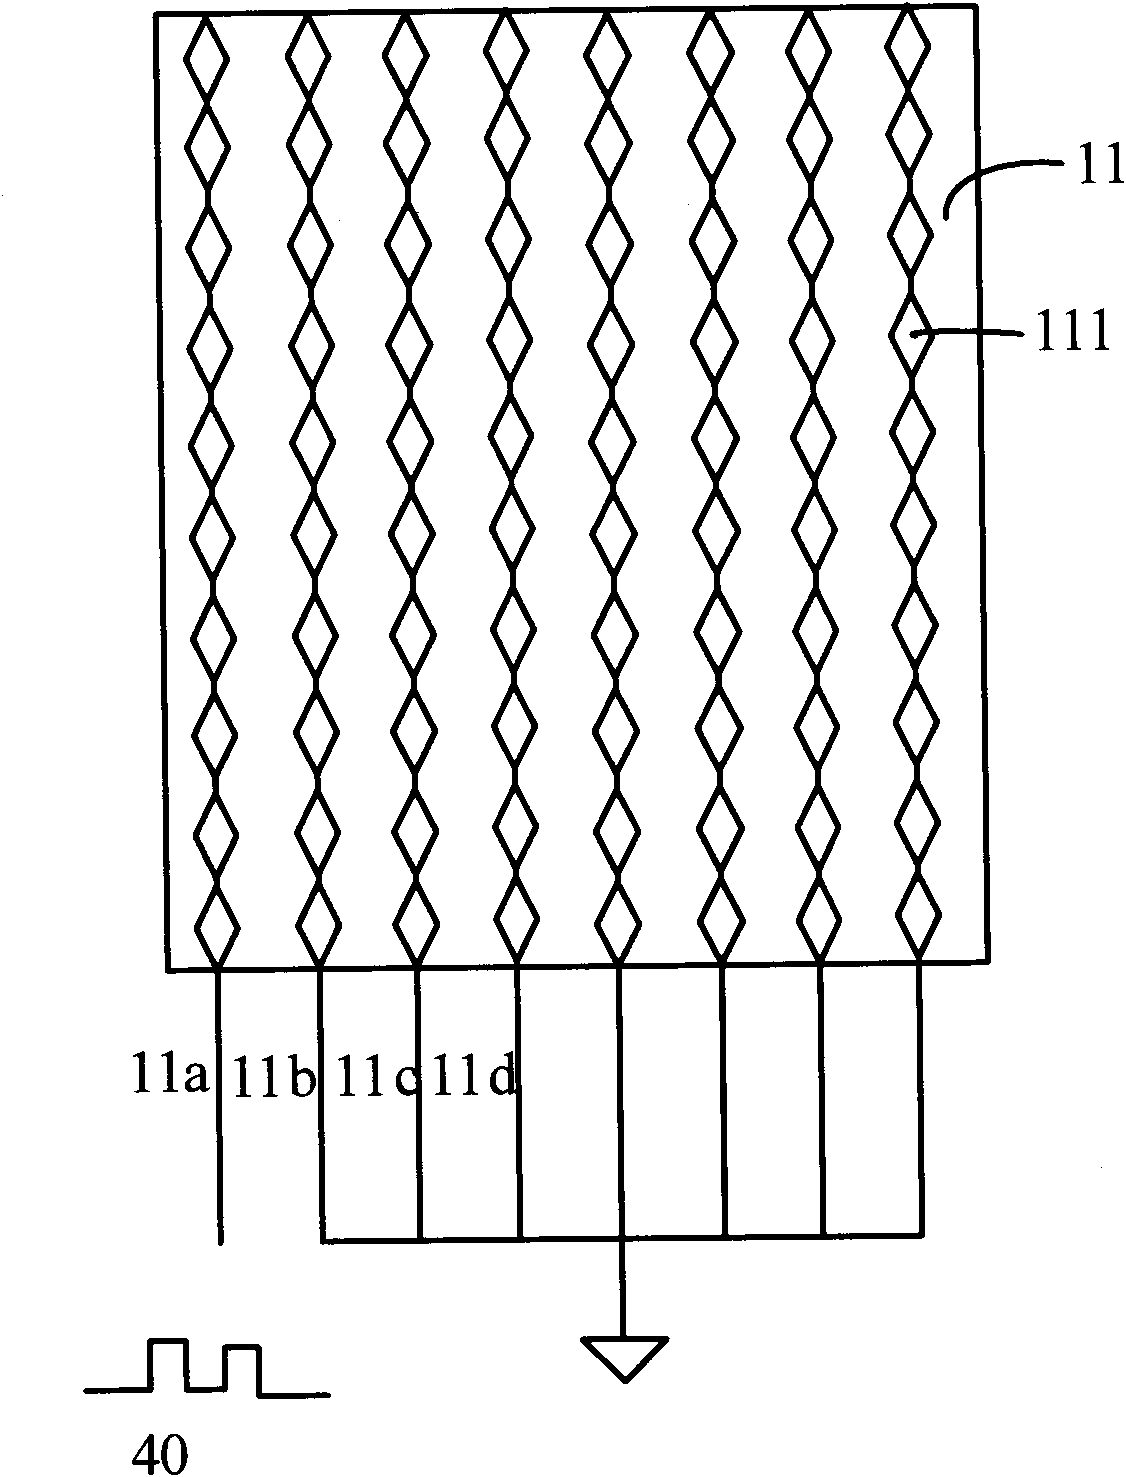 Touch liquid crystal display and color filter substrate